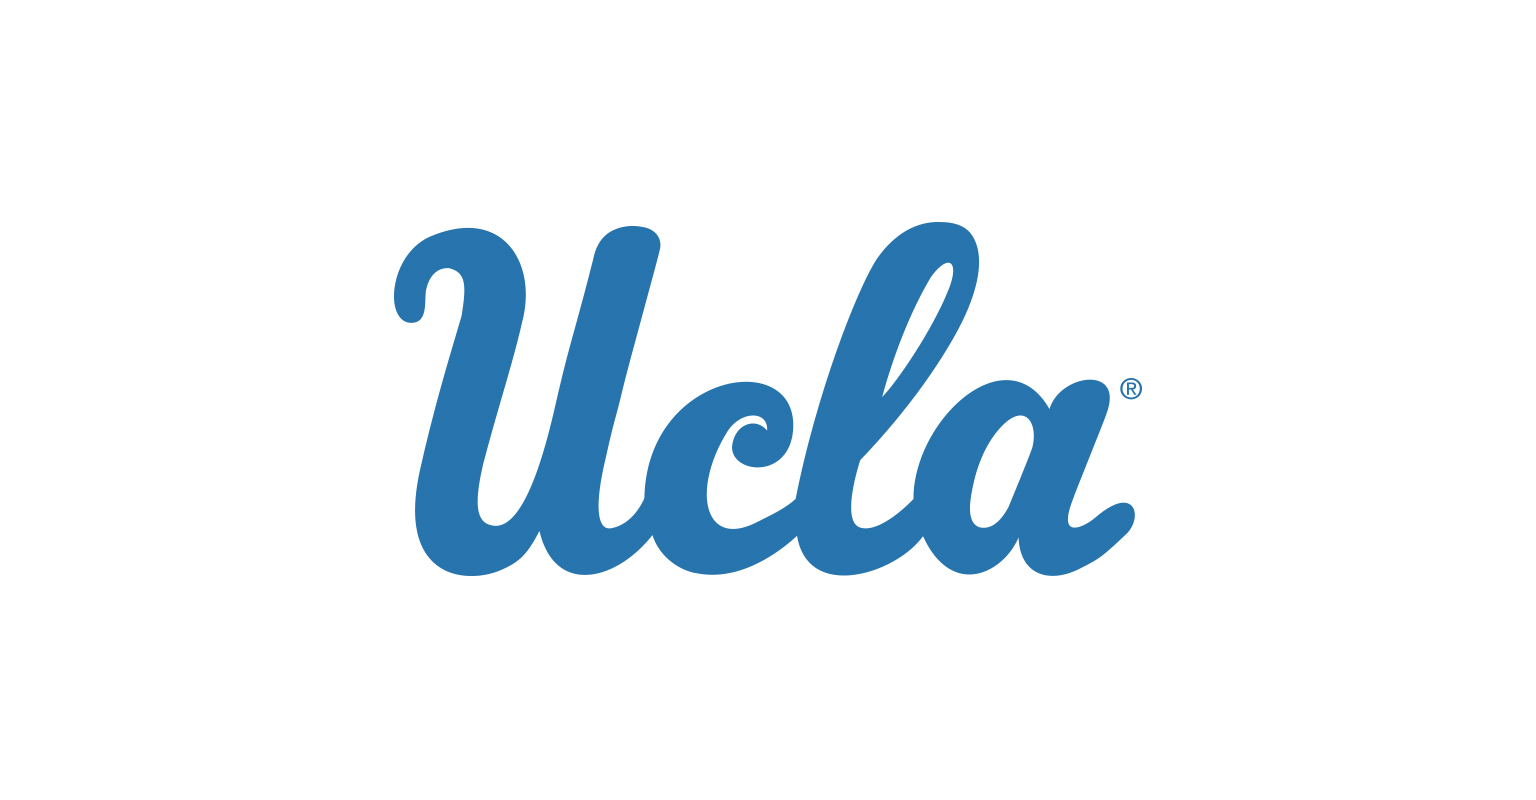 Graphic Footprints Client Logos - UCLA